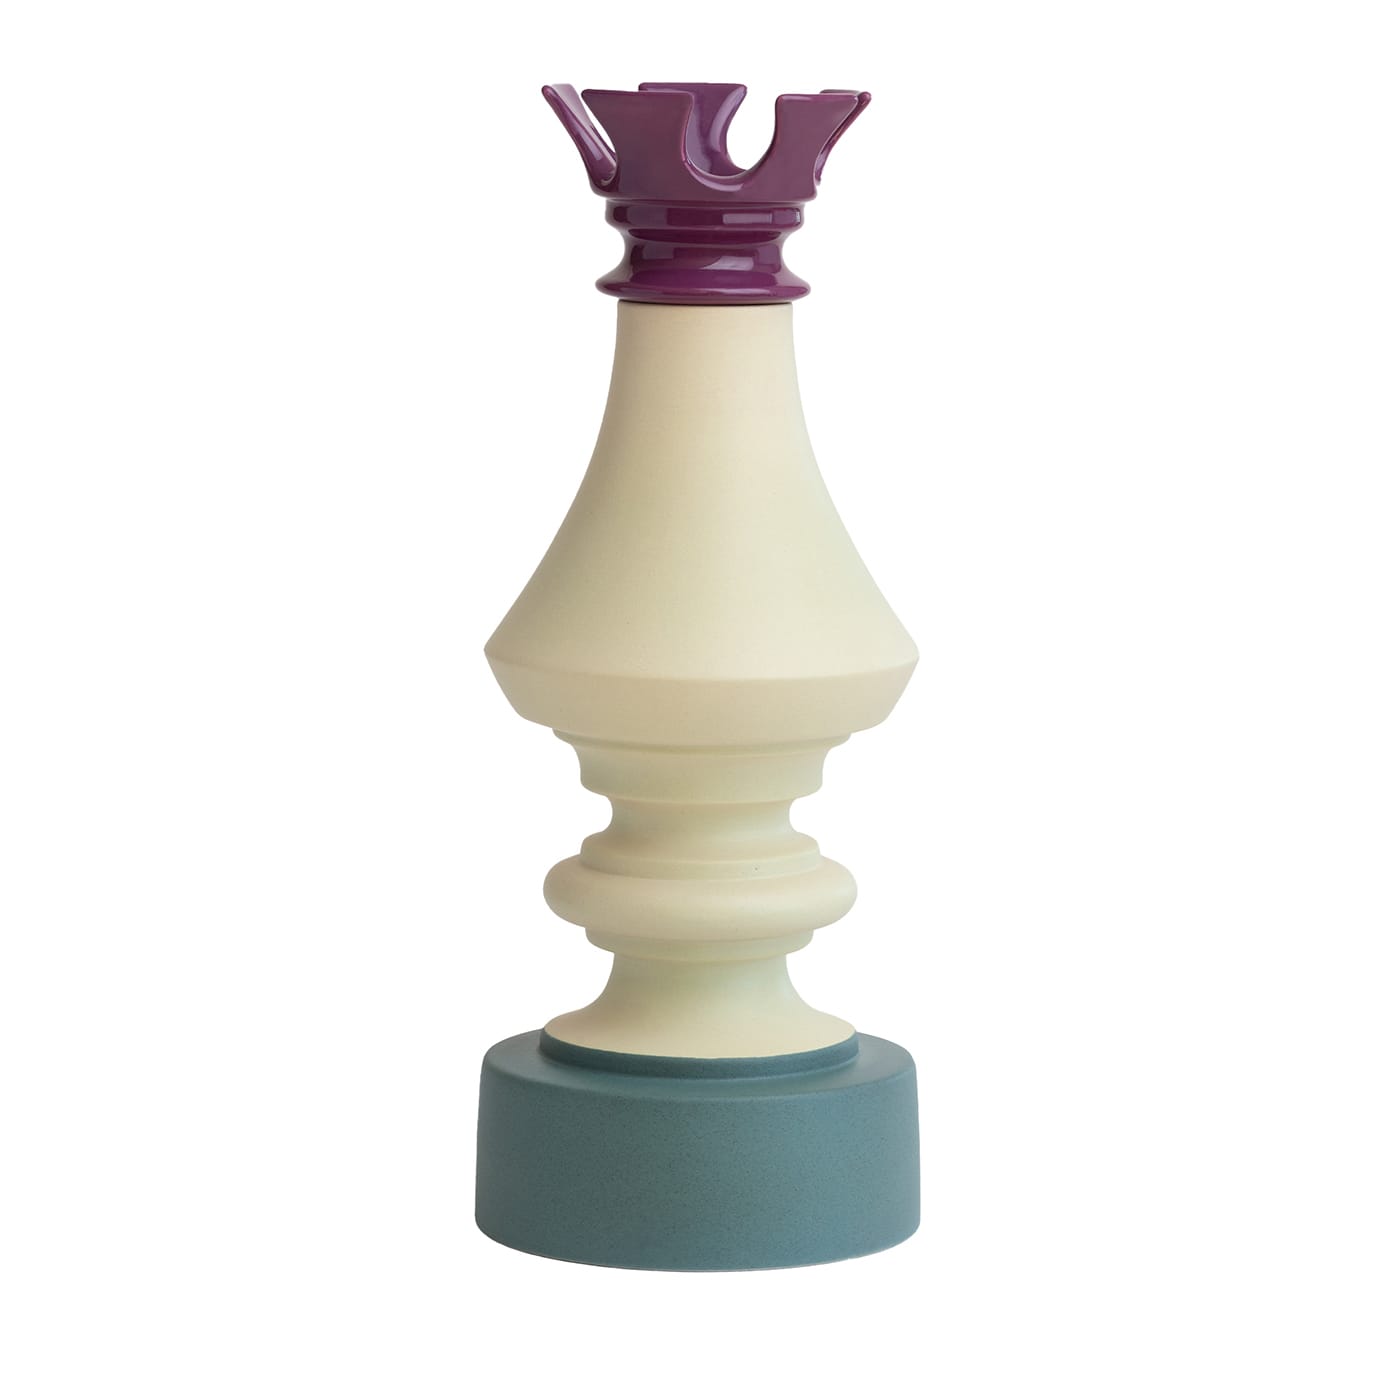 Torre Green and Purple Chess Statuette - Nuove Forme